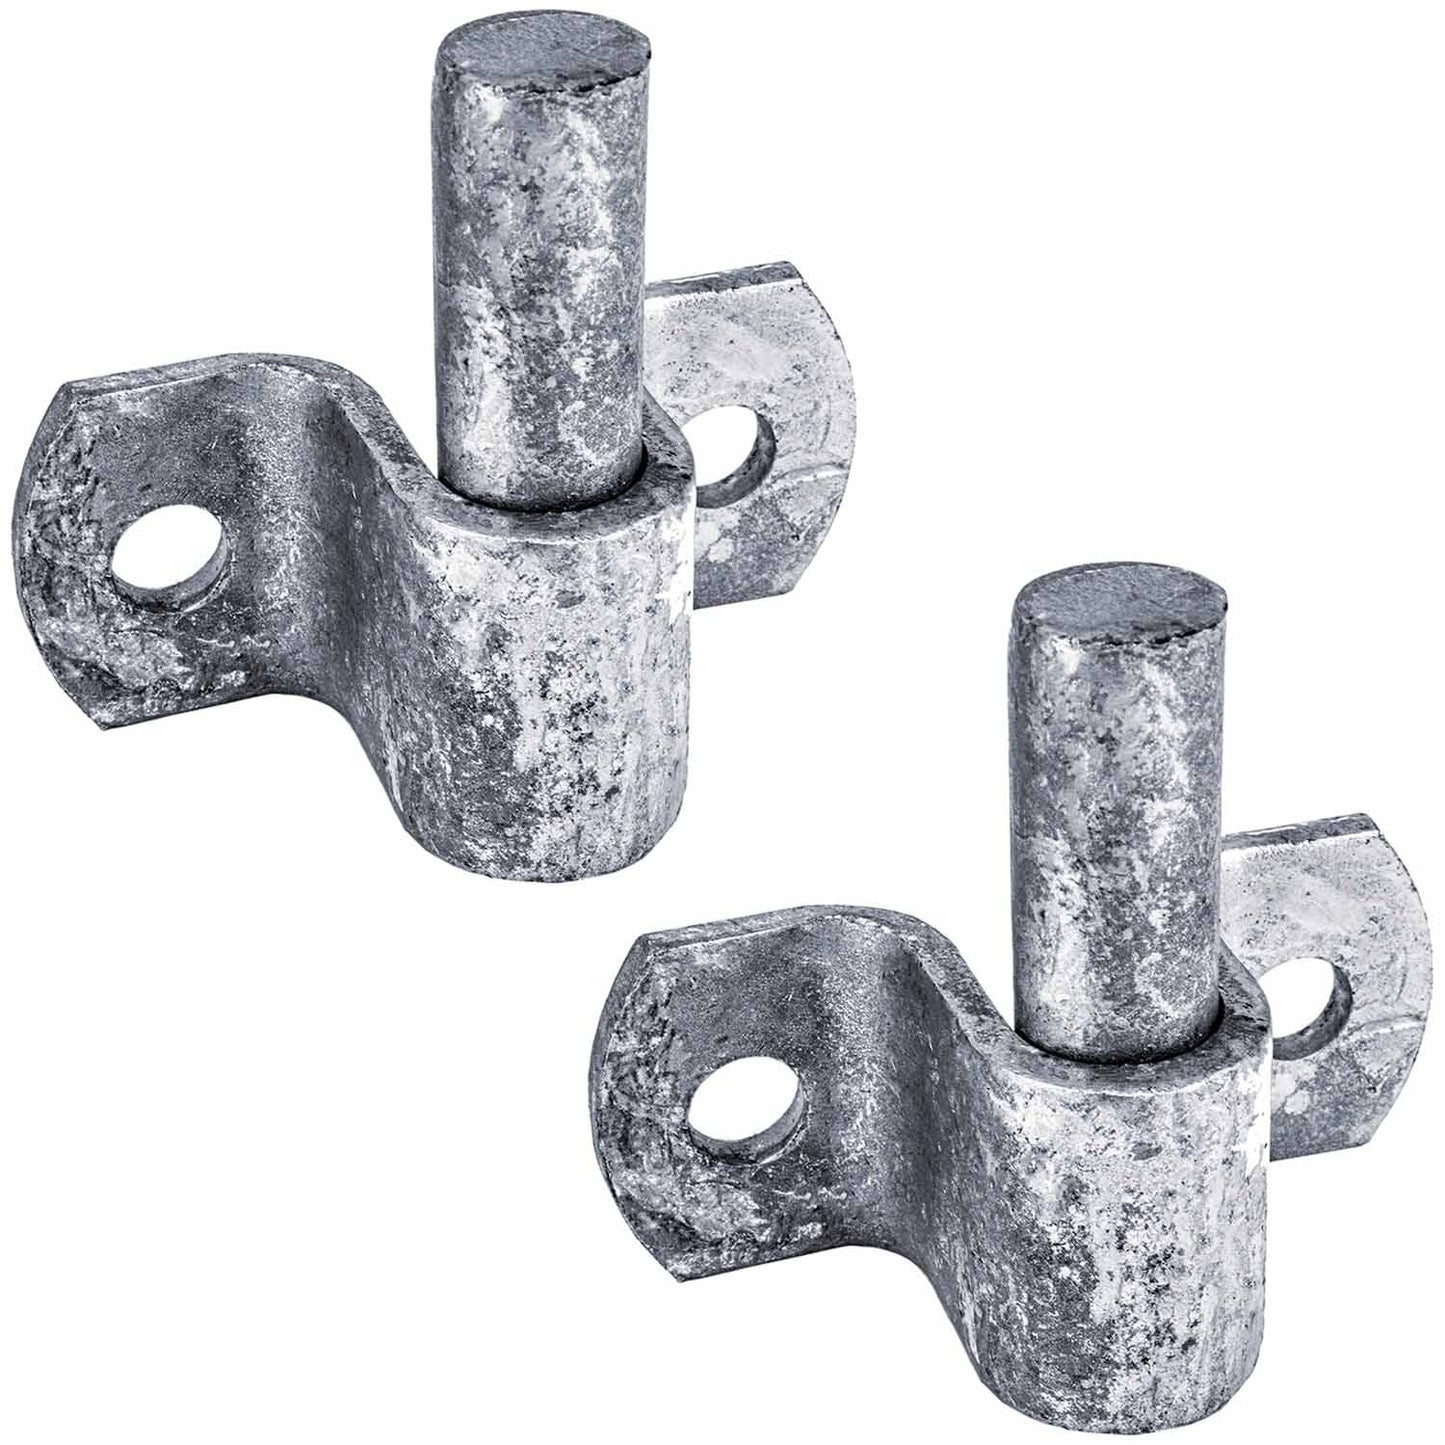 Wood Fence Post Chain Link Gate Hinge With 5/8 Hinge Pin. Constructed of Heavy Duty Galvanized Steel. Horizontal Mount. (2 Pack)